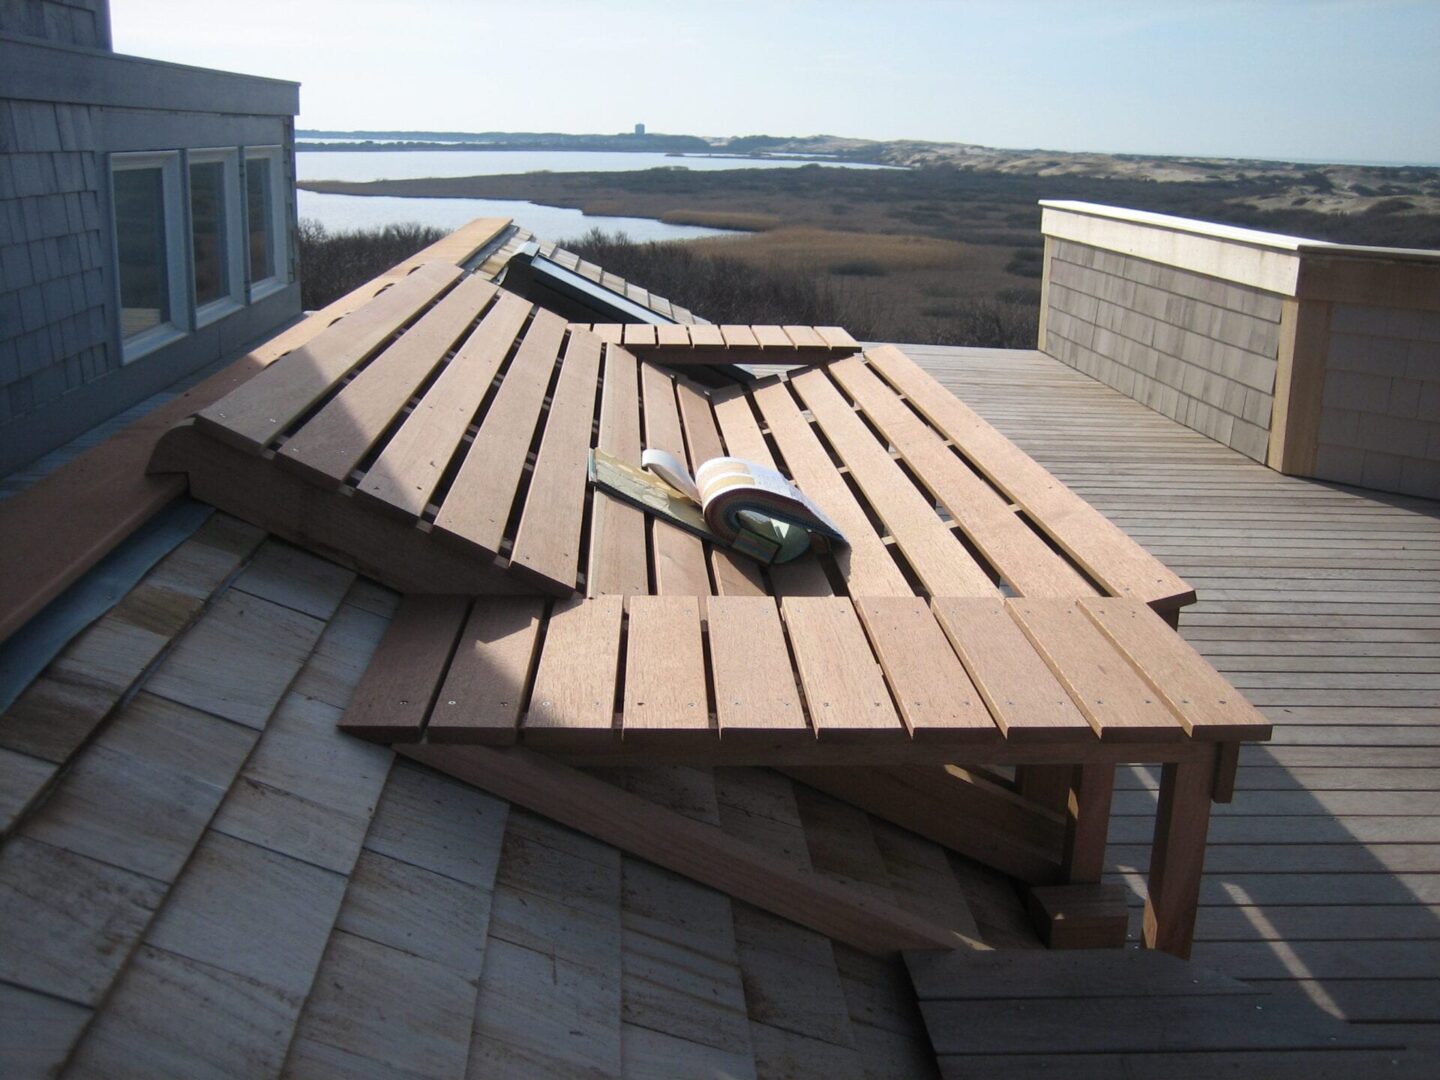 A wooden bench on top of a roof.